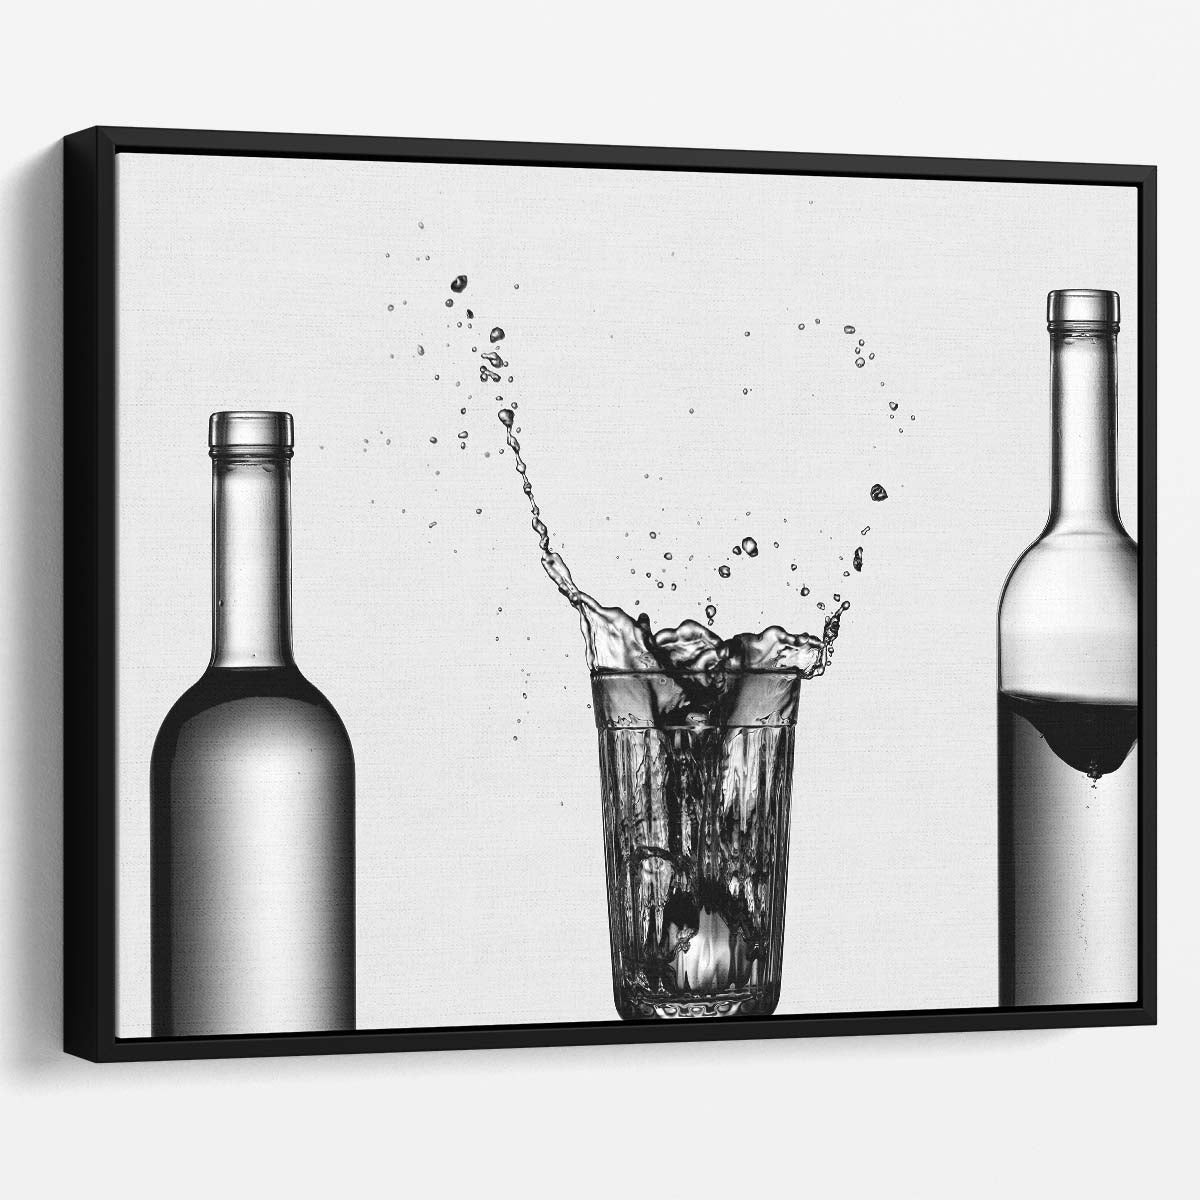 Icy Splash Wine & Water Bottles Panoramic Wall Art by Luxuriance Designs. Made in USA.